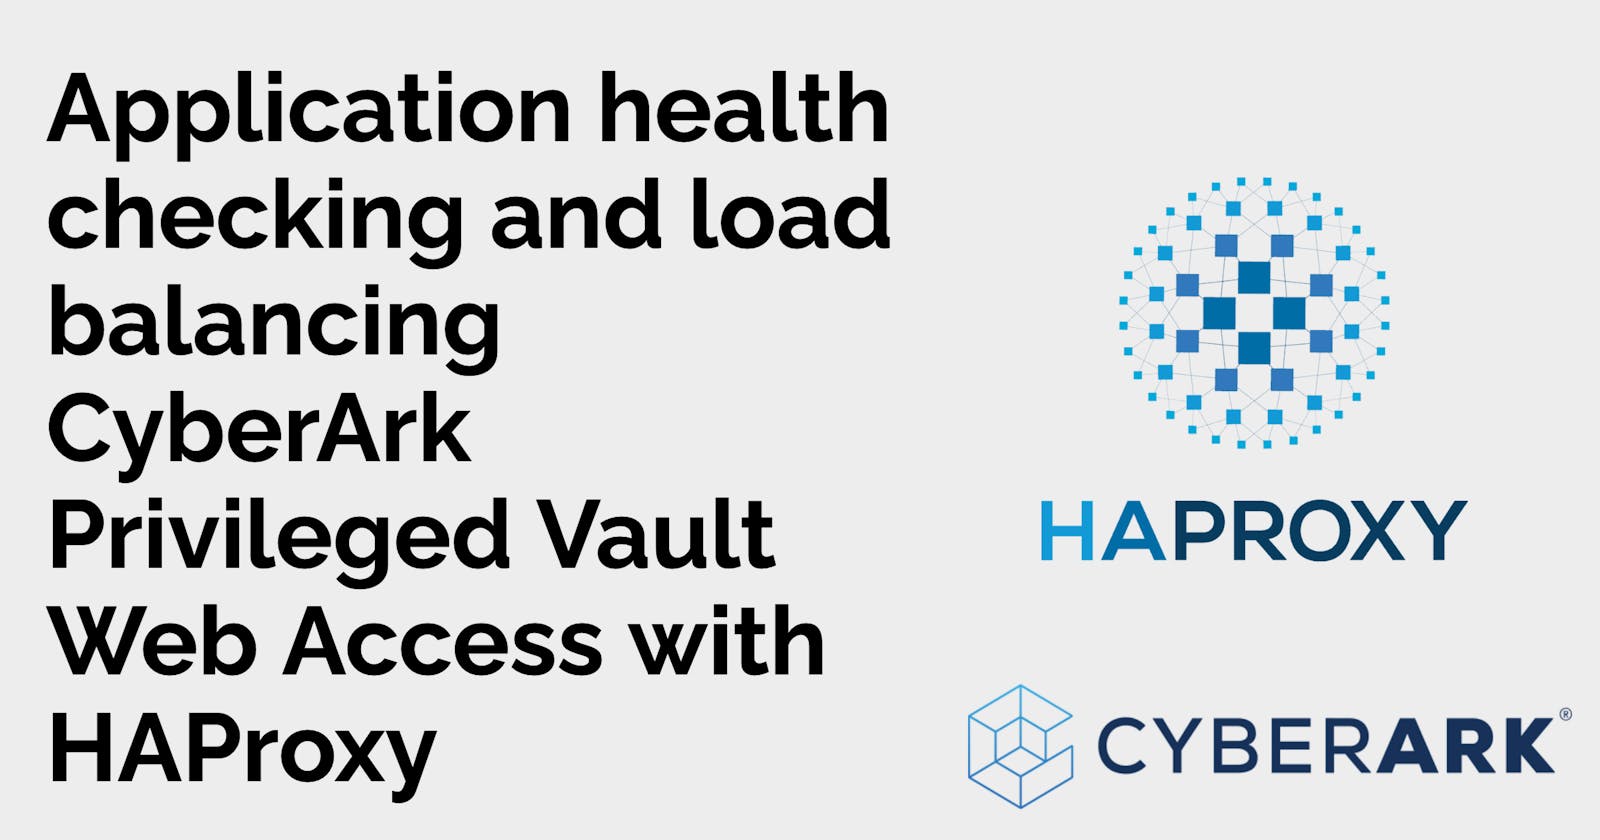 Application health checking and load balancing CyberArk Privileged Vault Web Access with HAProxy